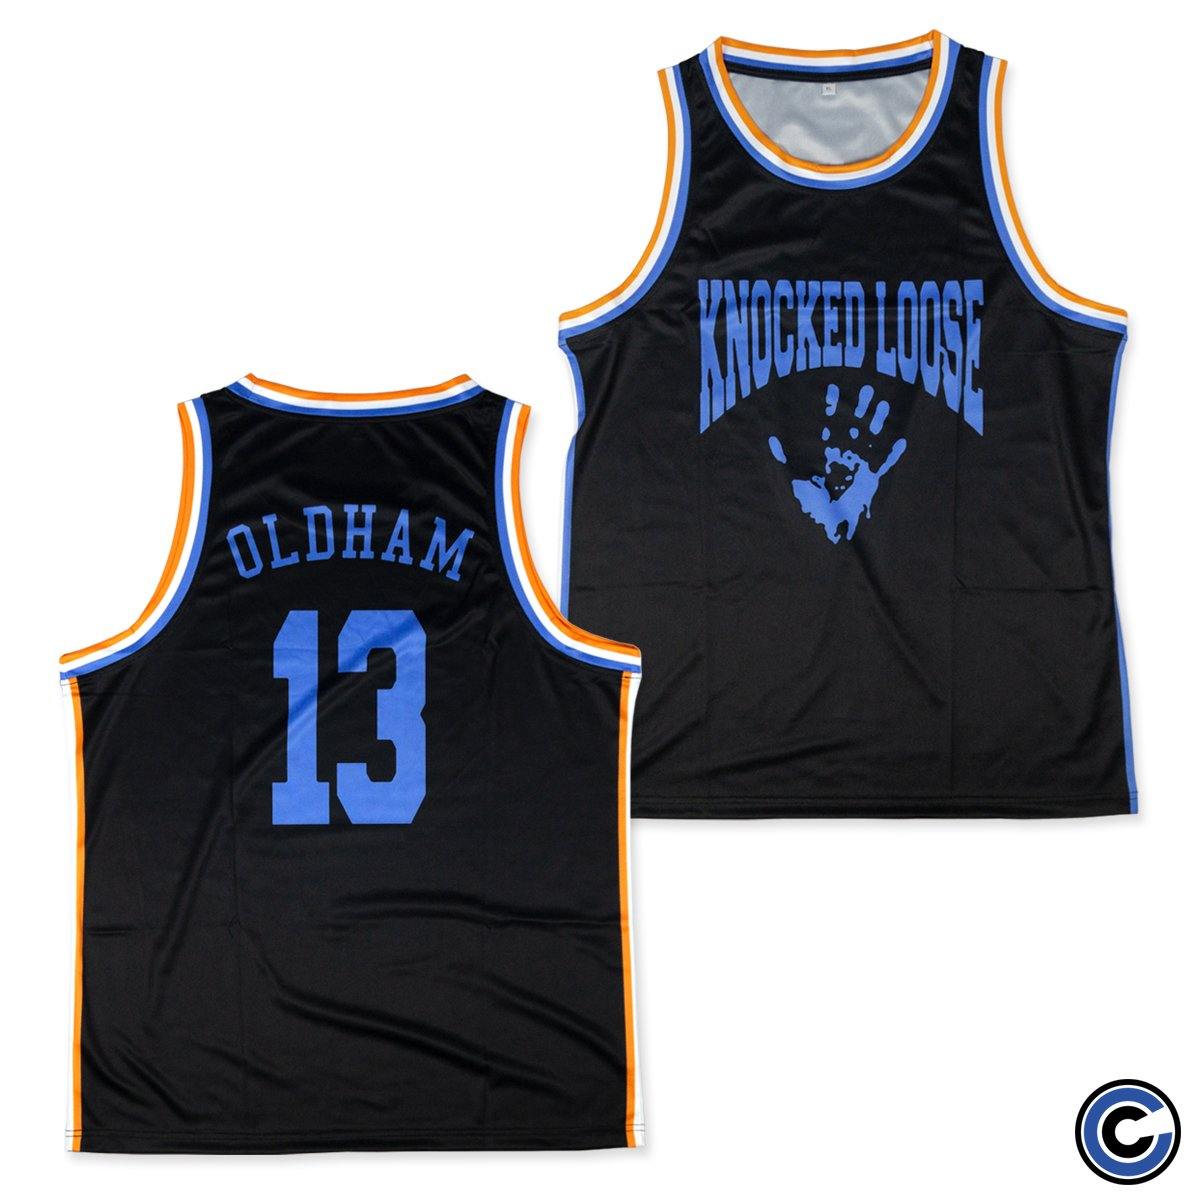 Buy – Knocked Loose "Hand" Basketball Jersey – Band & Music Merch – Cold Cuts Merch